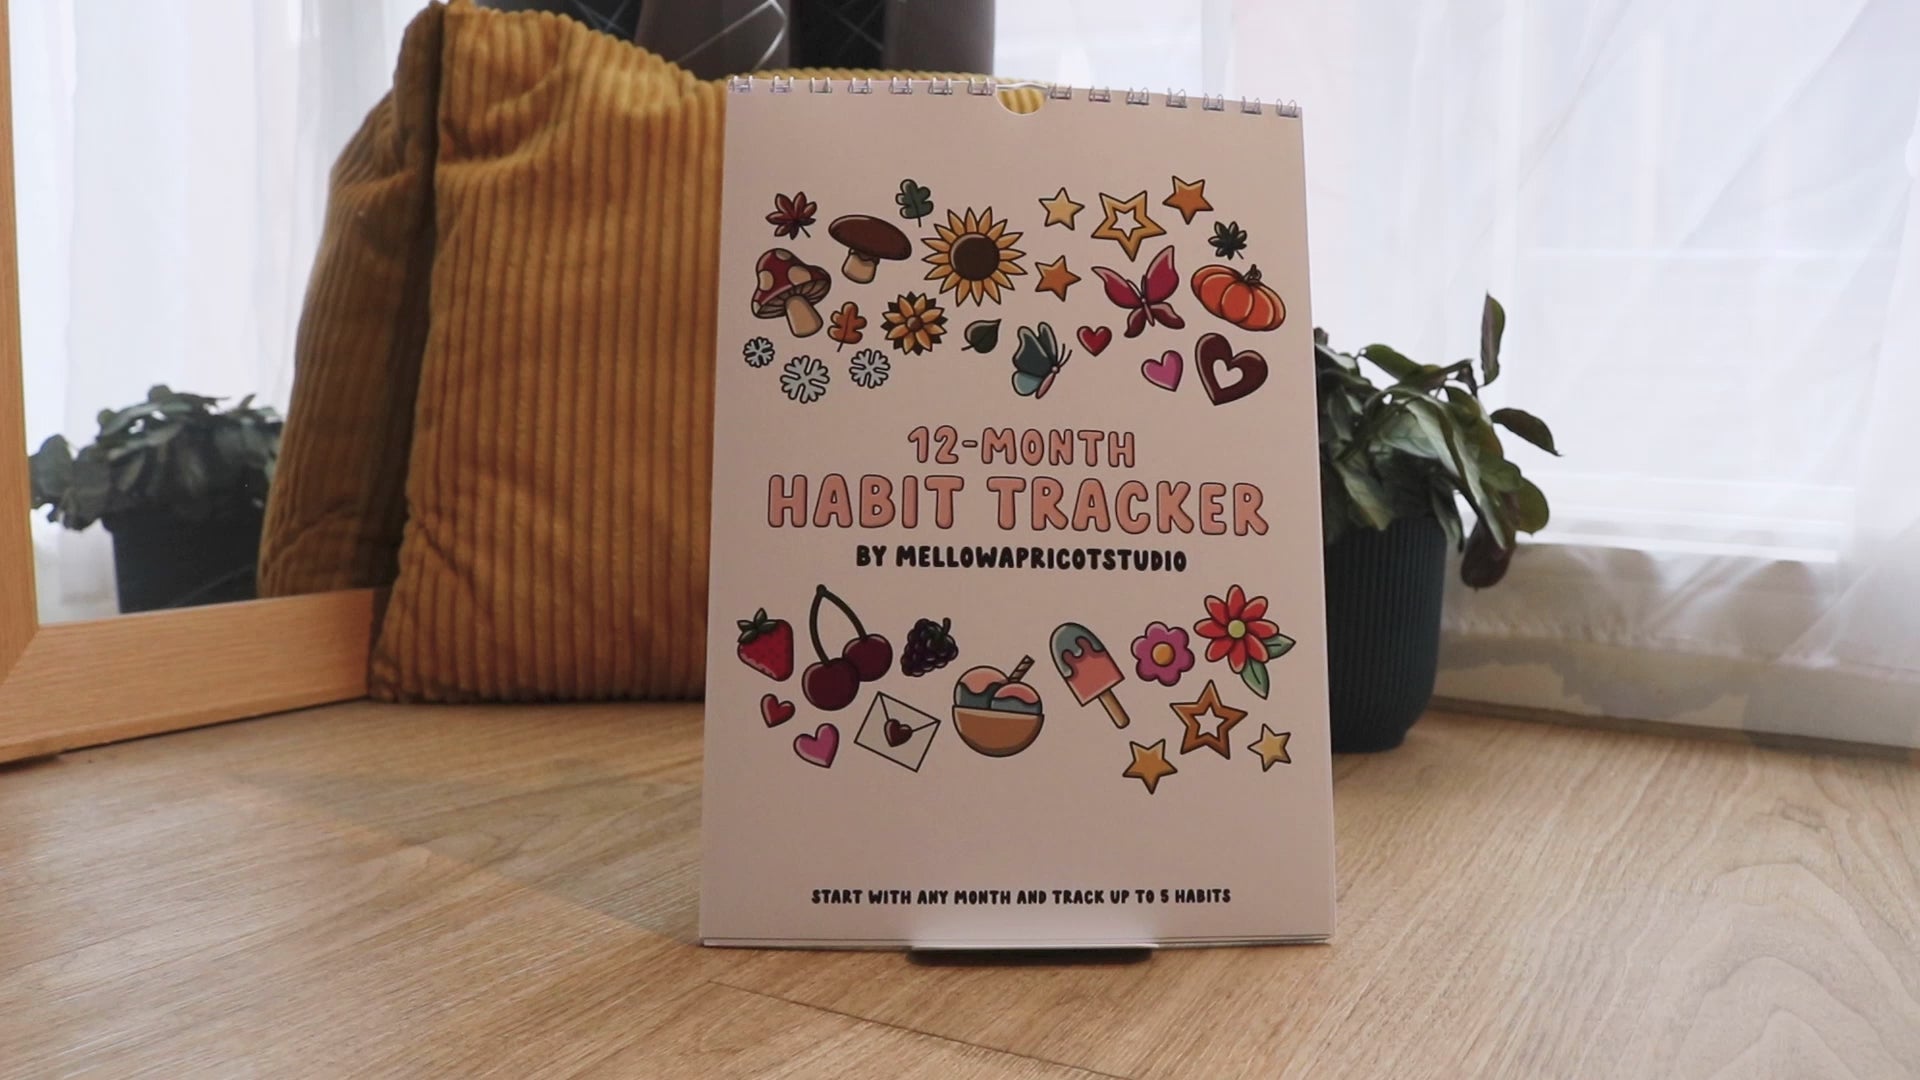 12-Month Playful Habit Tracker by MellowApricotStudio - video flipping through all the pages